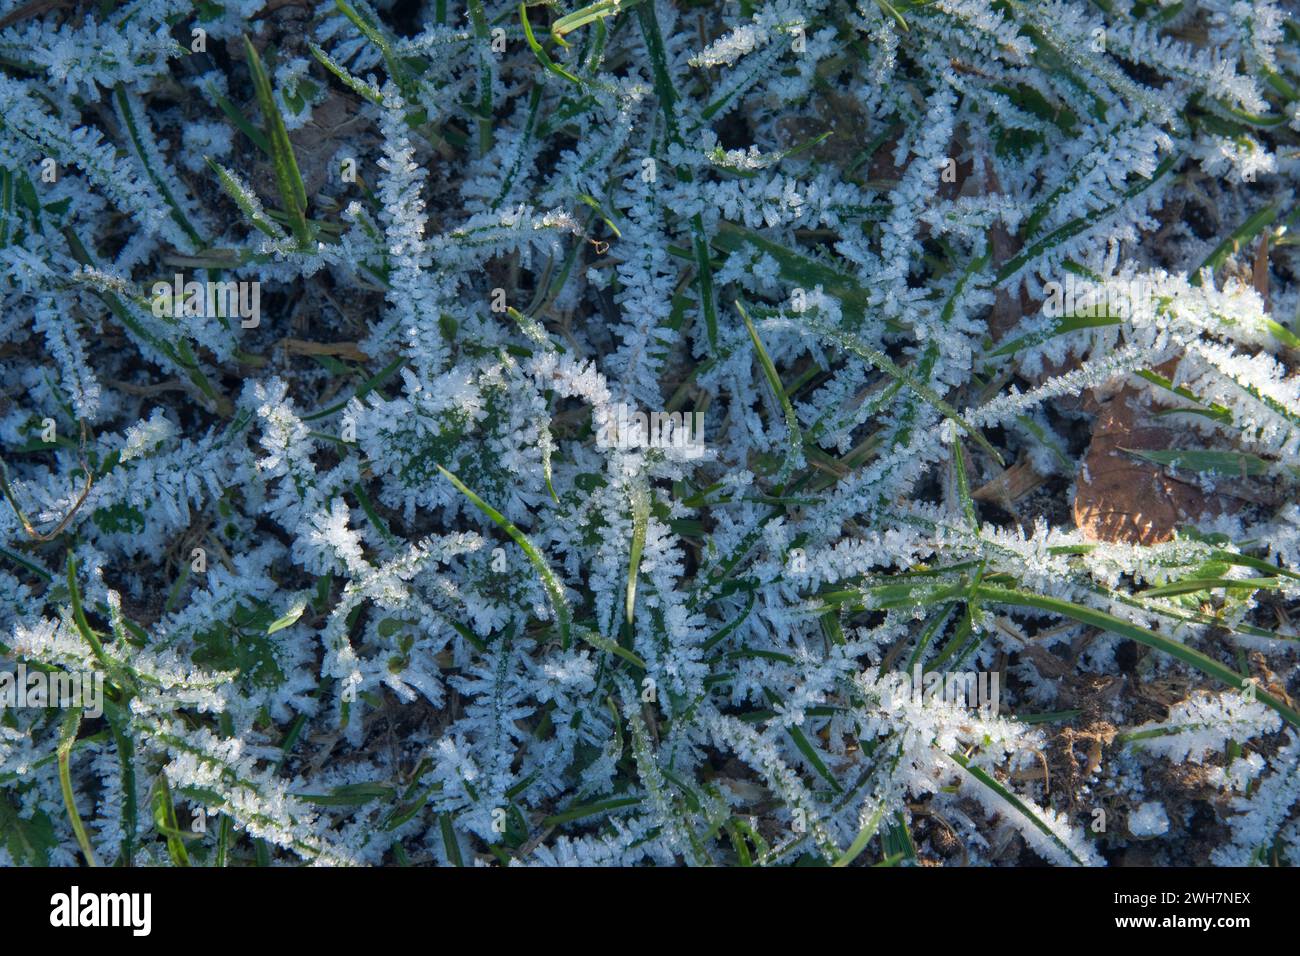 Hoar frost formed on grass leaves after a cold night being gently warmed by bright rays of early morning sunshine, Berkshire, January Stock Photo